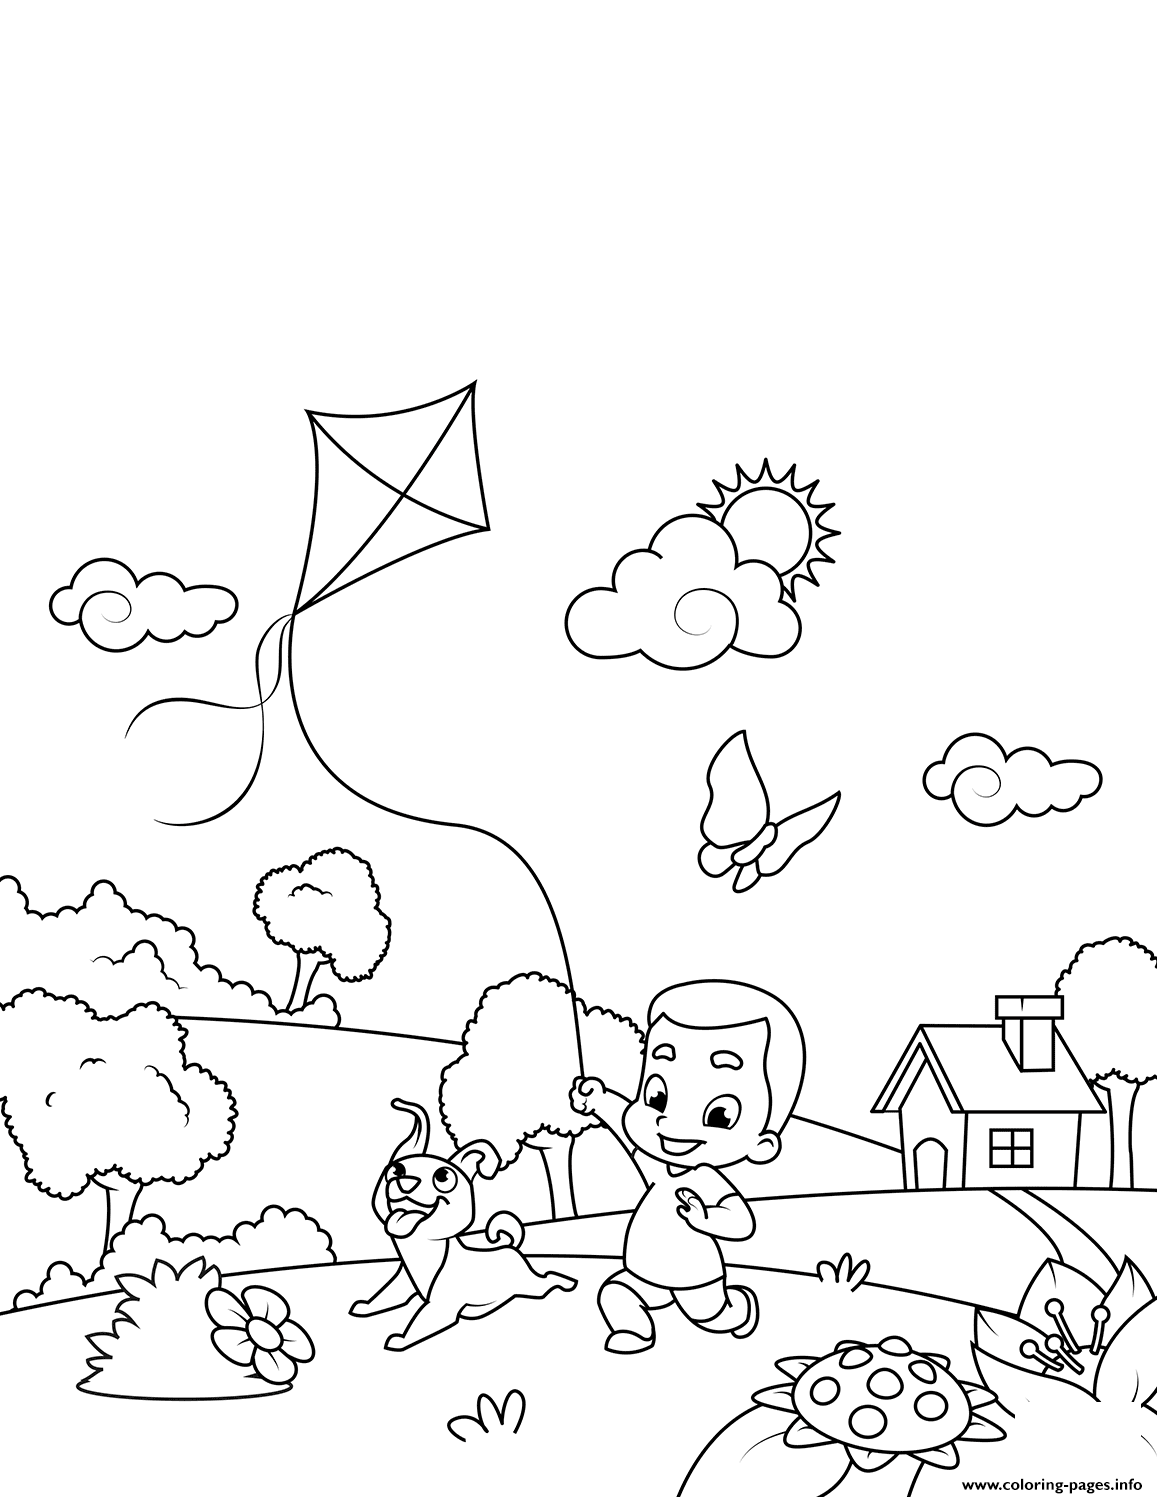 Boy With A Dog Flying A Kite coloring